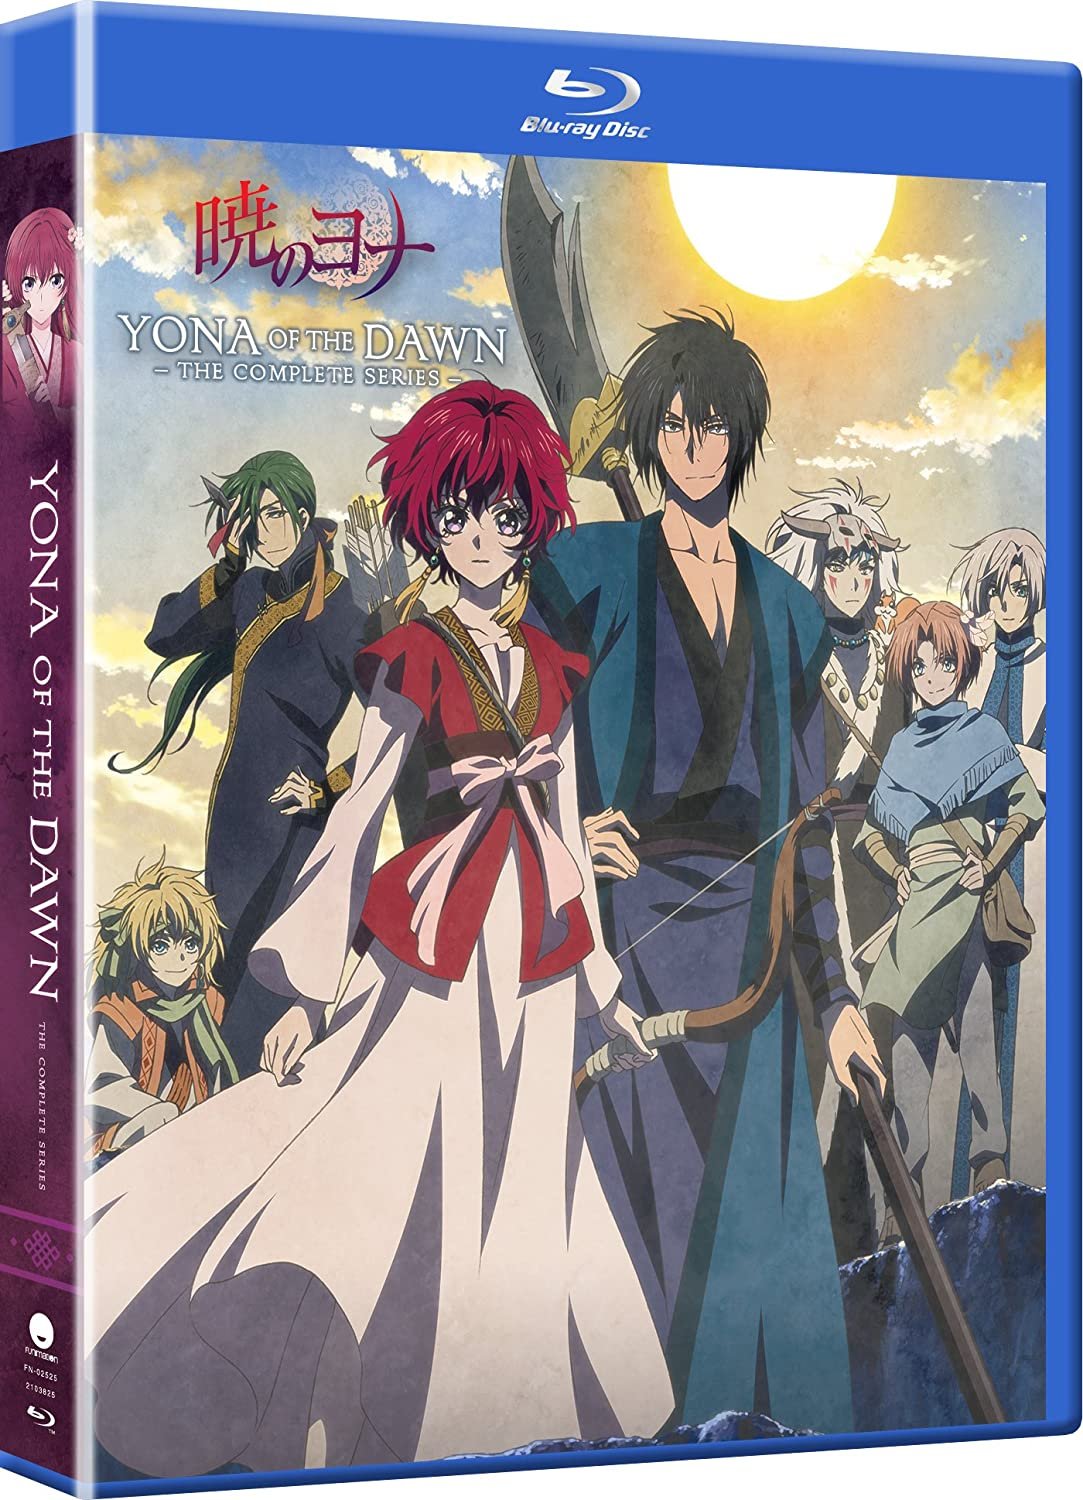 CD Shop - ANIME YONA OF THE DAWN: THE COMPLETE SERIES